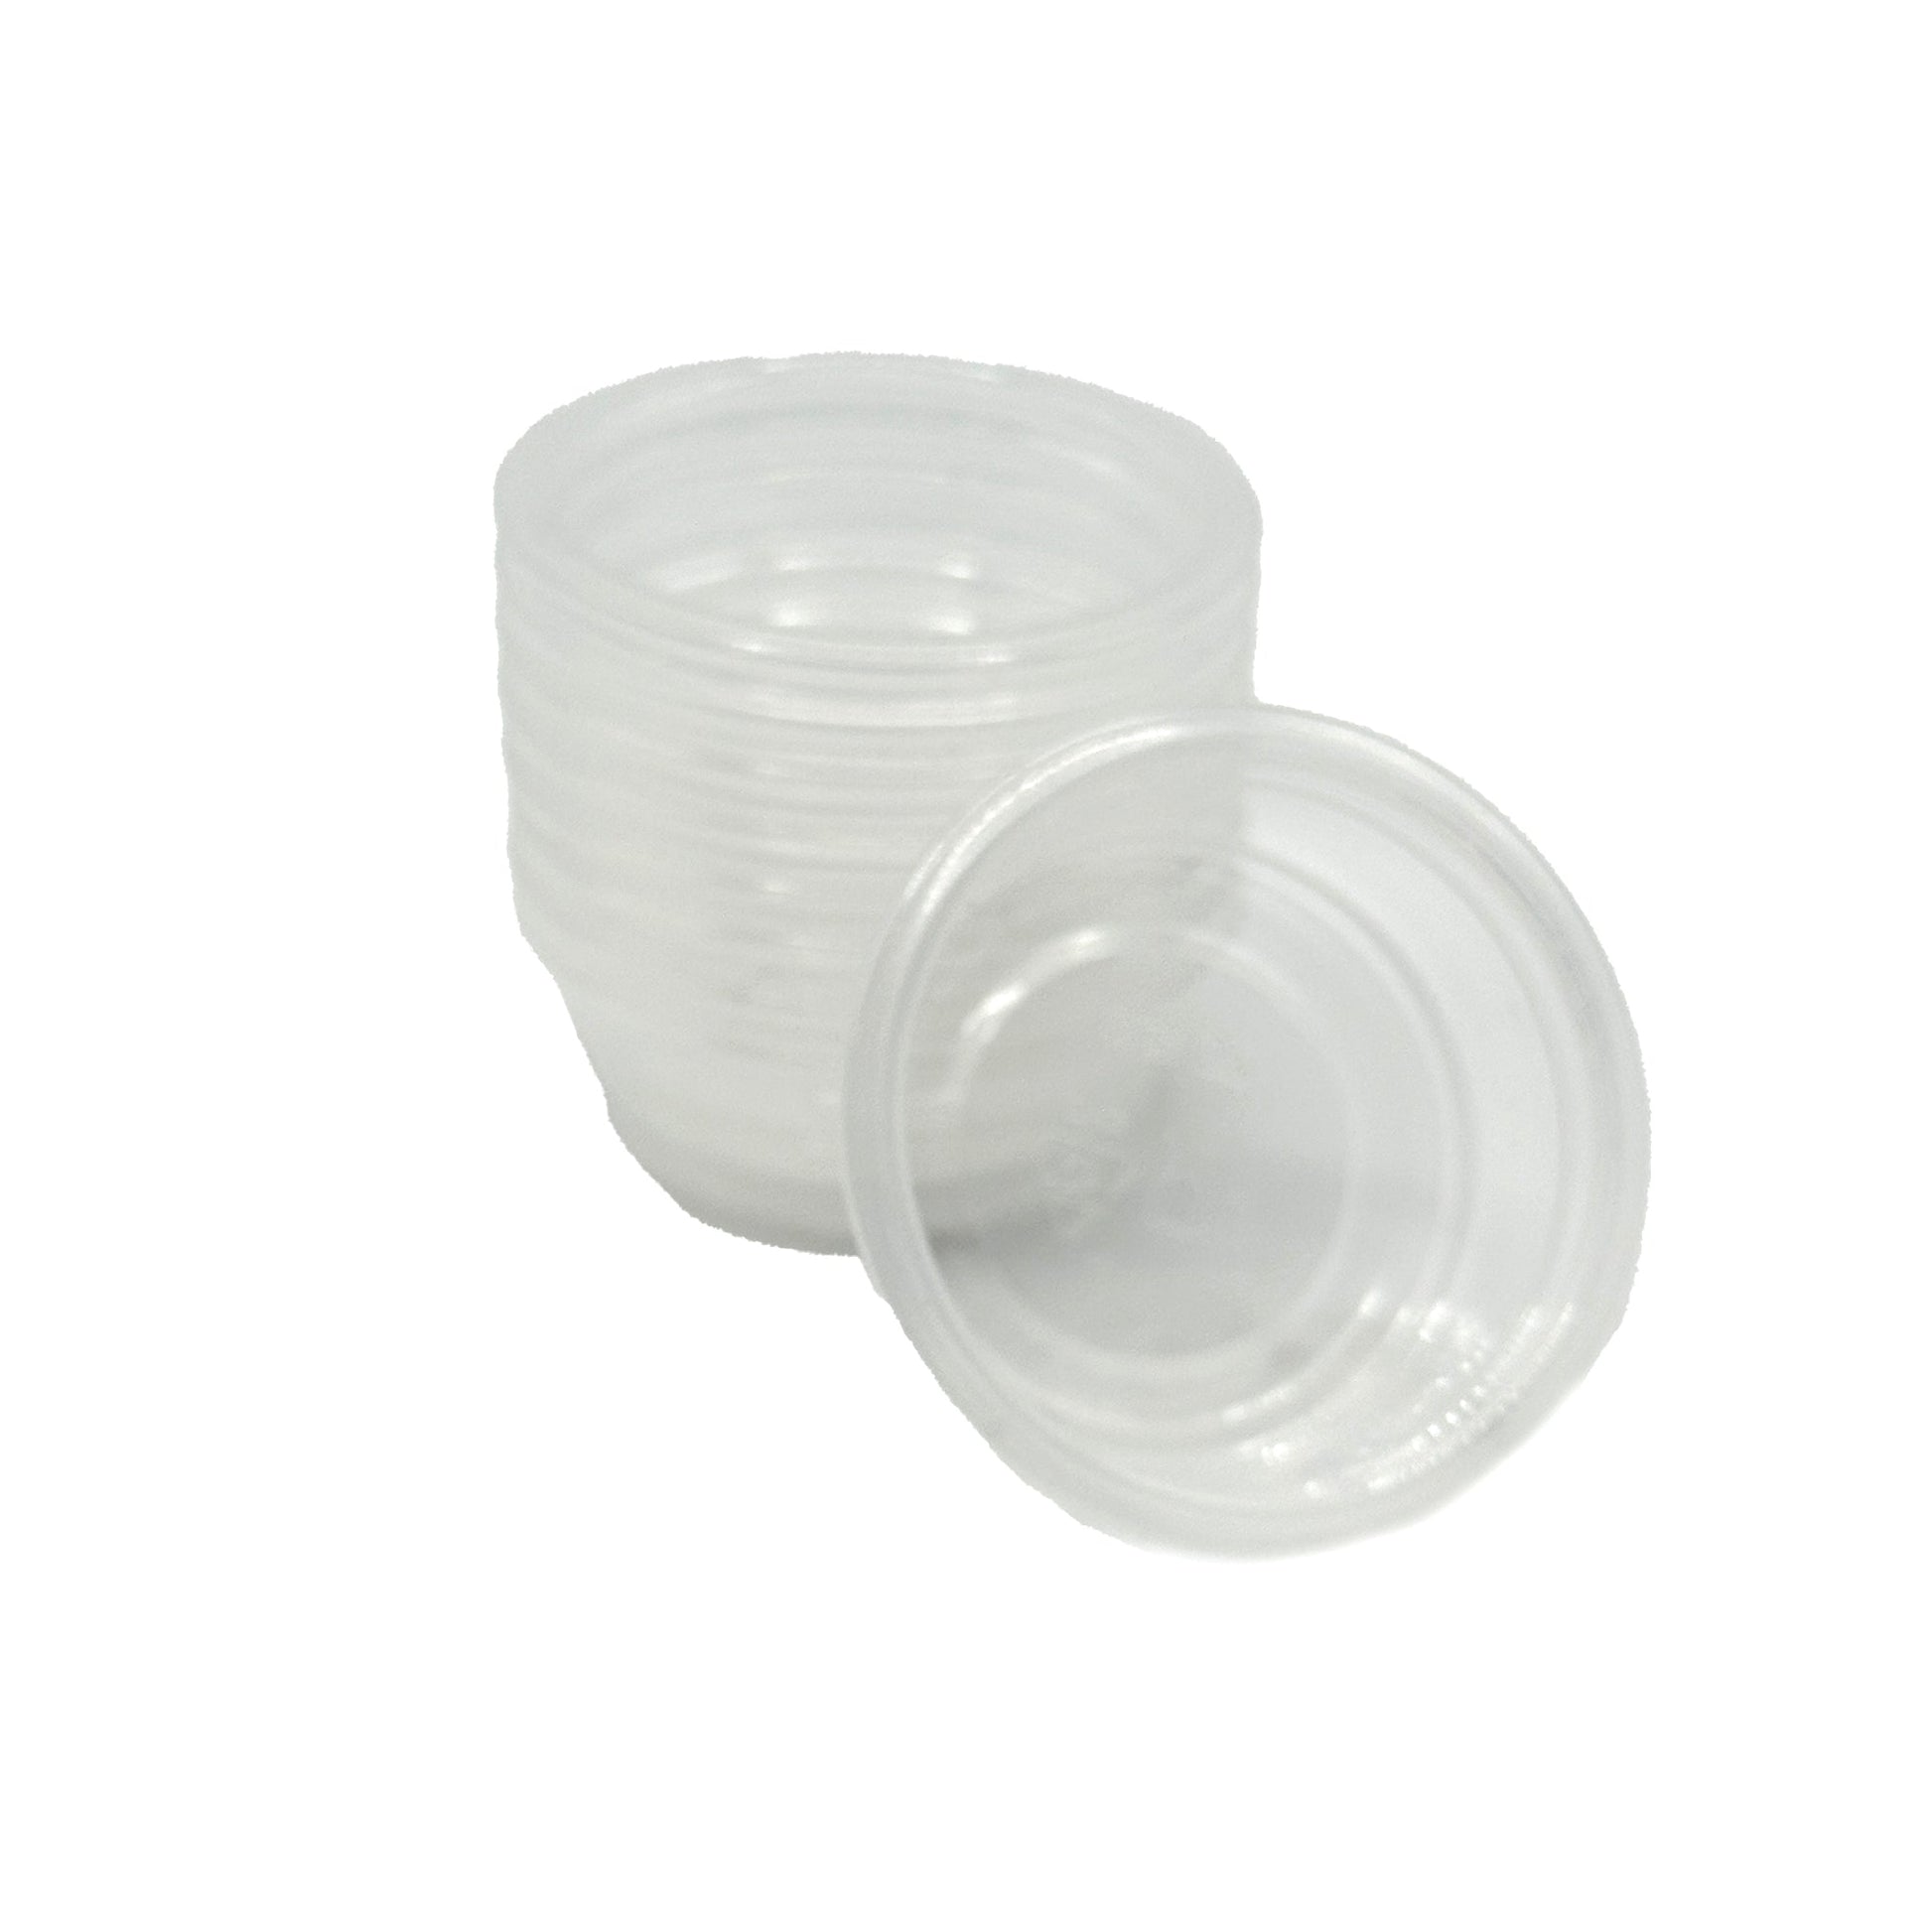 Reptile 0.5oz Cup Feeding Dish 50 Pack Reusable & Paper - Wild Pet Supply